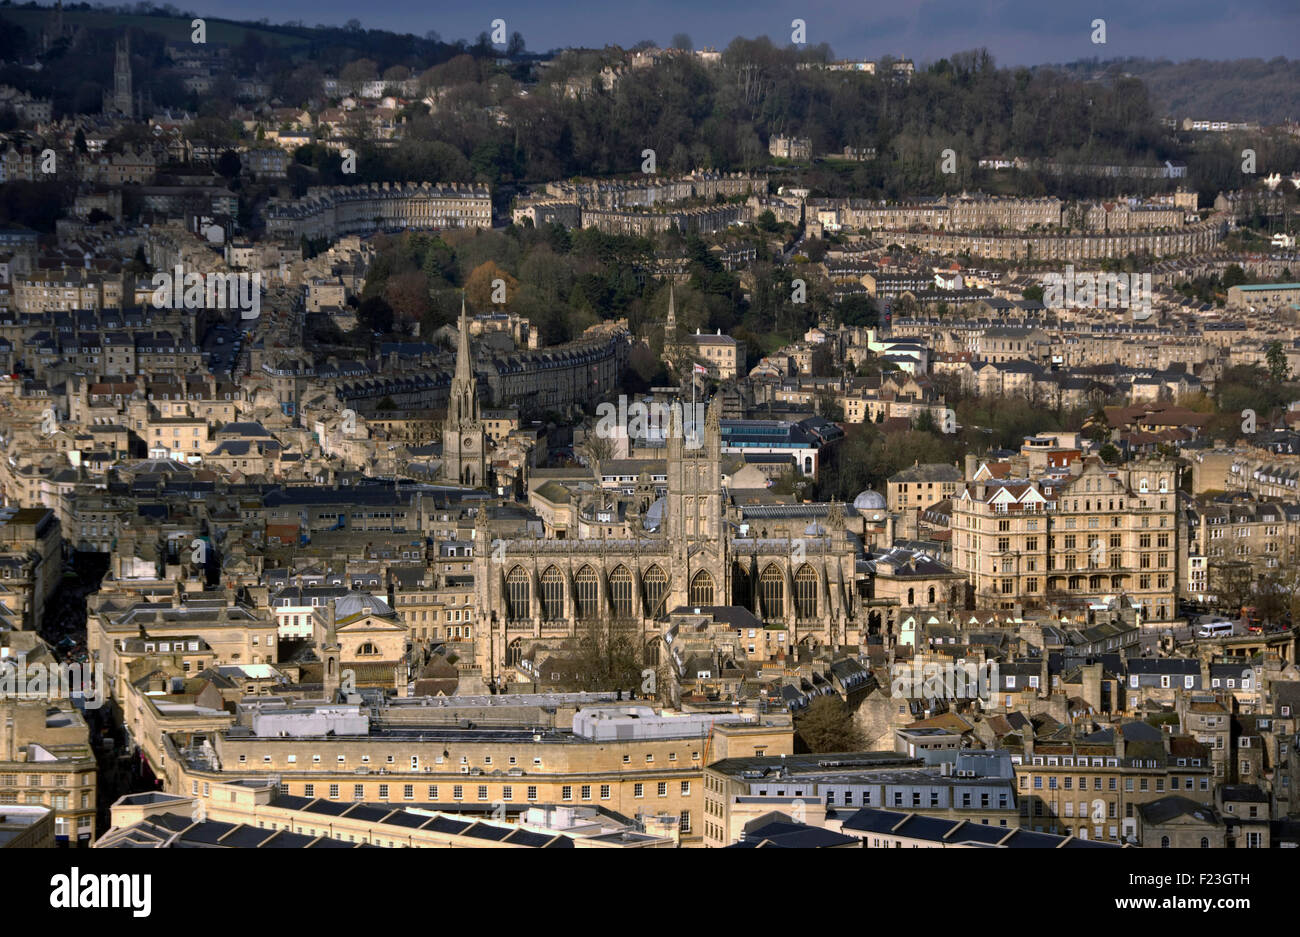 The city of Bath views, including abbey churchyard and the circus with tourist bus. a UK visit visitors cities 'Bath Abbey' Stock Photo